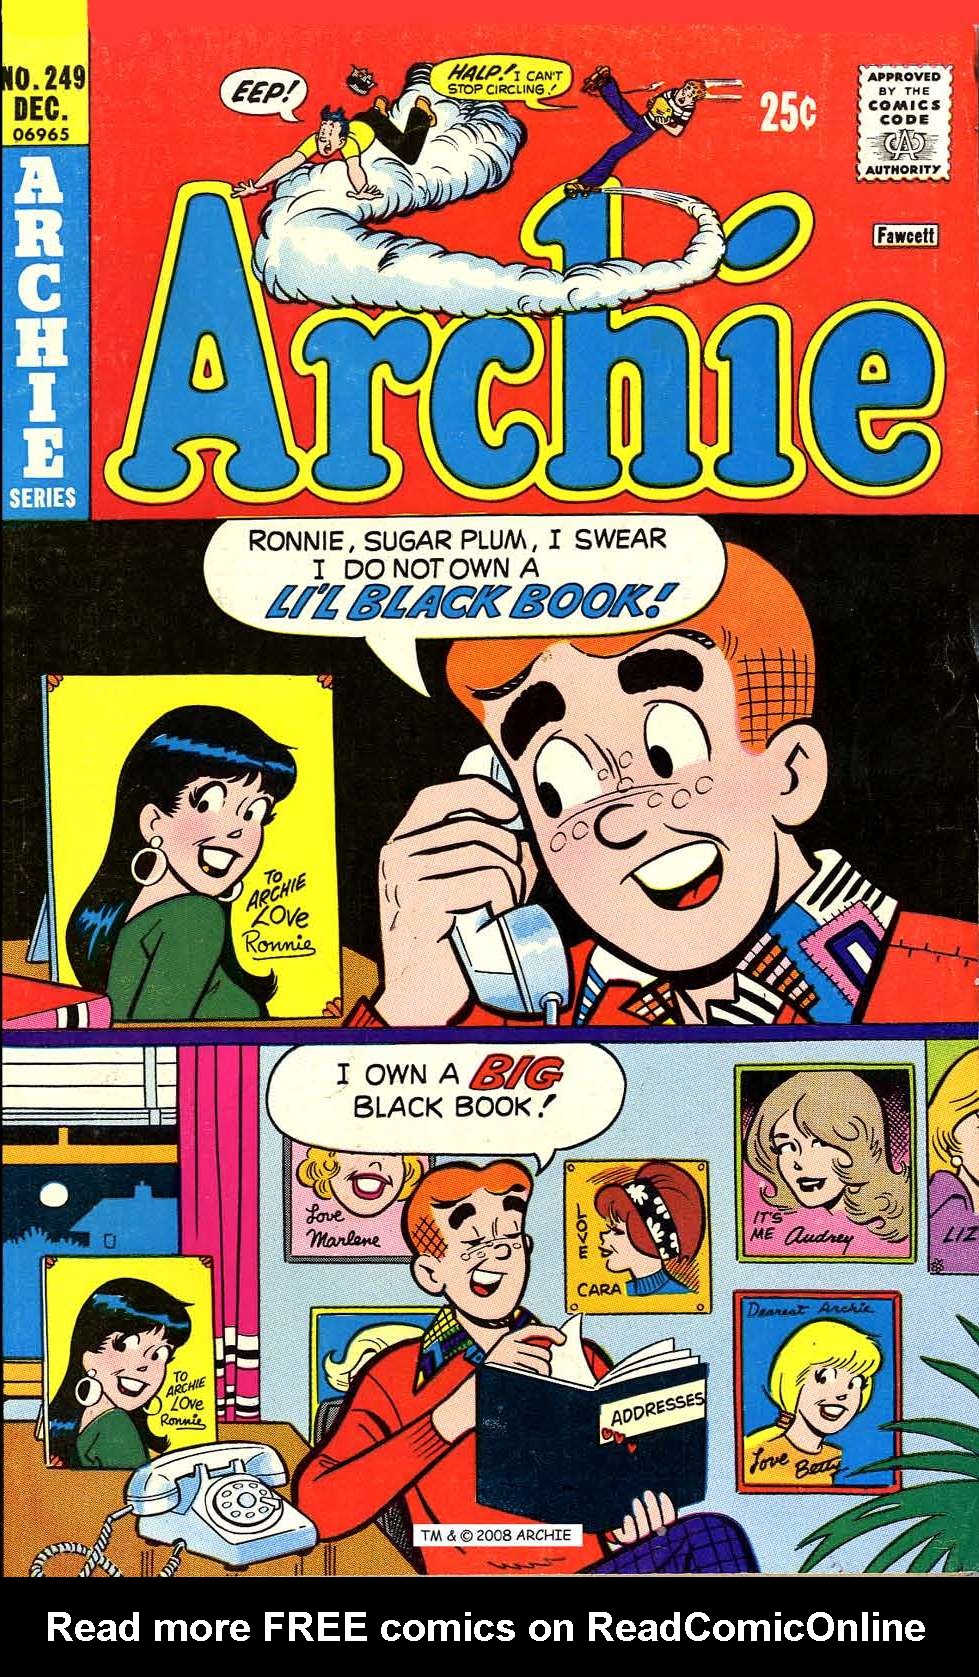 Read online Archie (1960) comic -  Issue #249 - 1